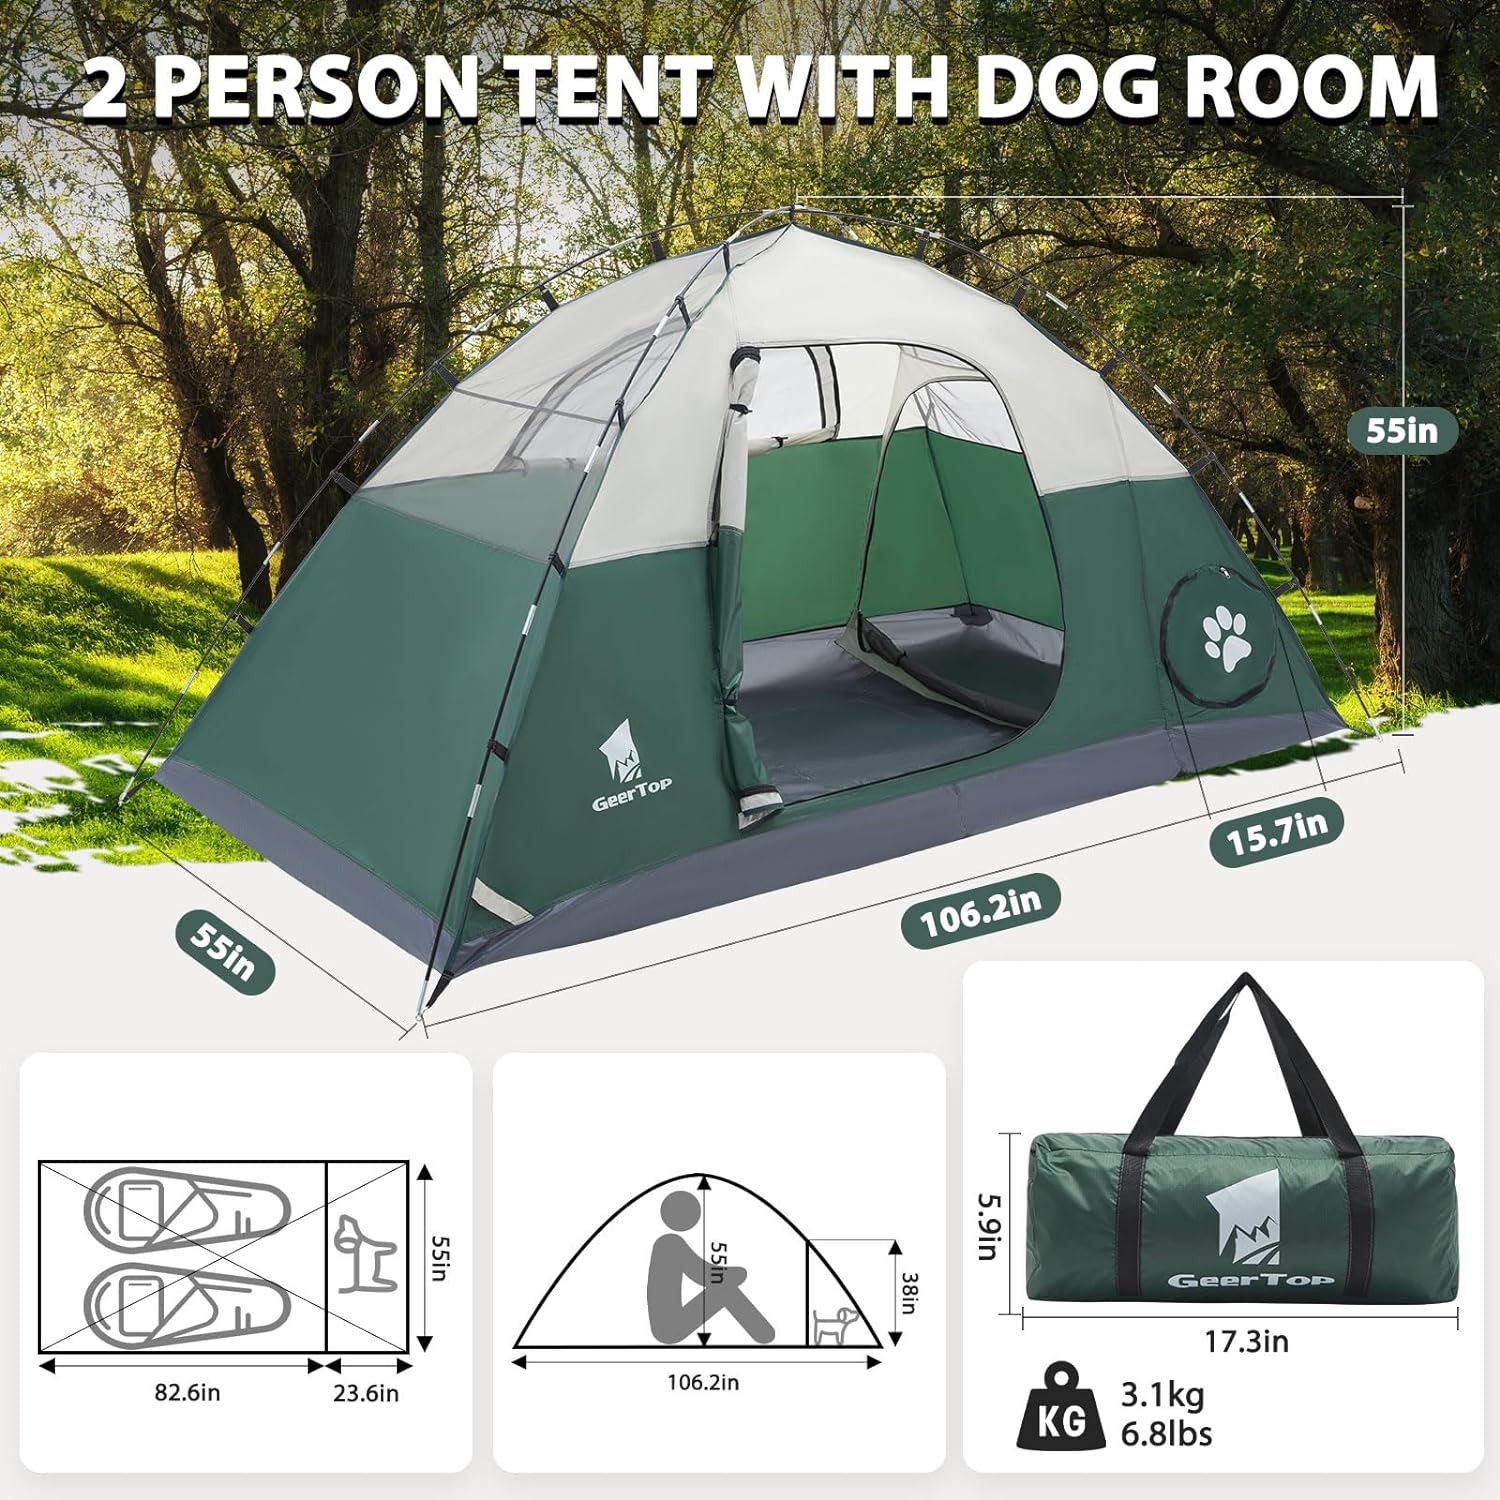 GeerTop 2 Person 3 Season Camping Tent with Individual Pet Dog Room Suitable For Tall Guys